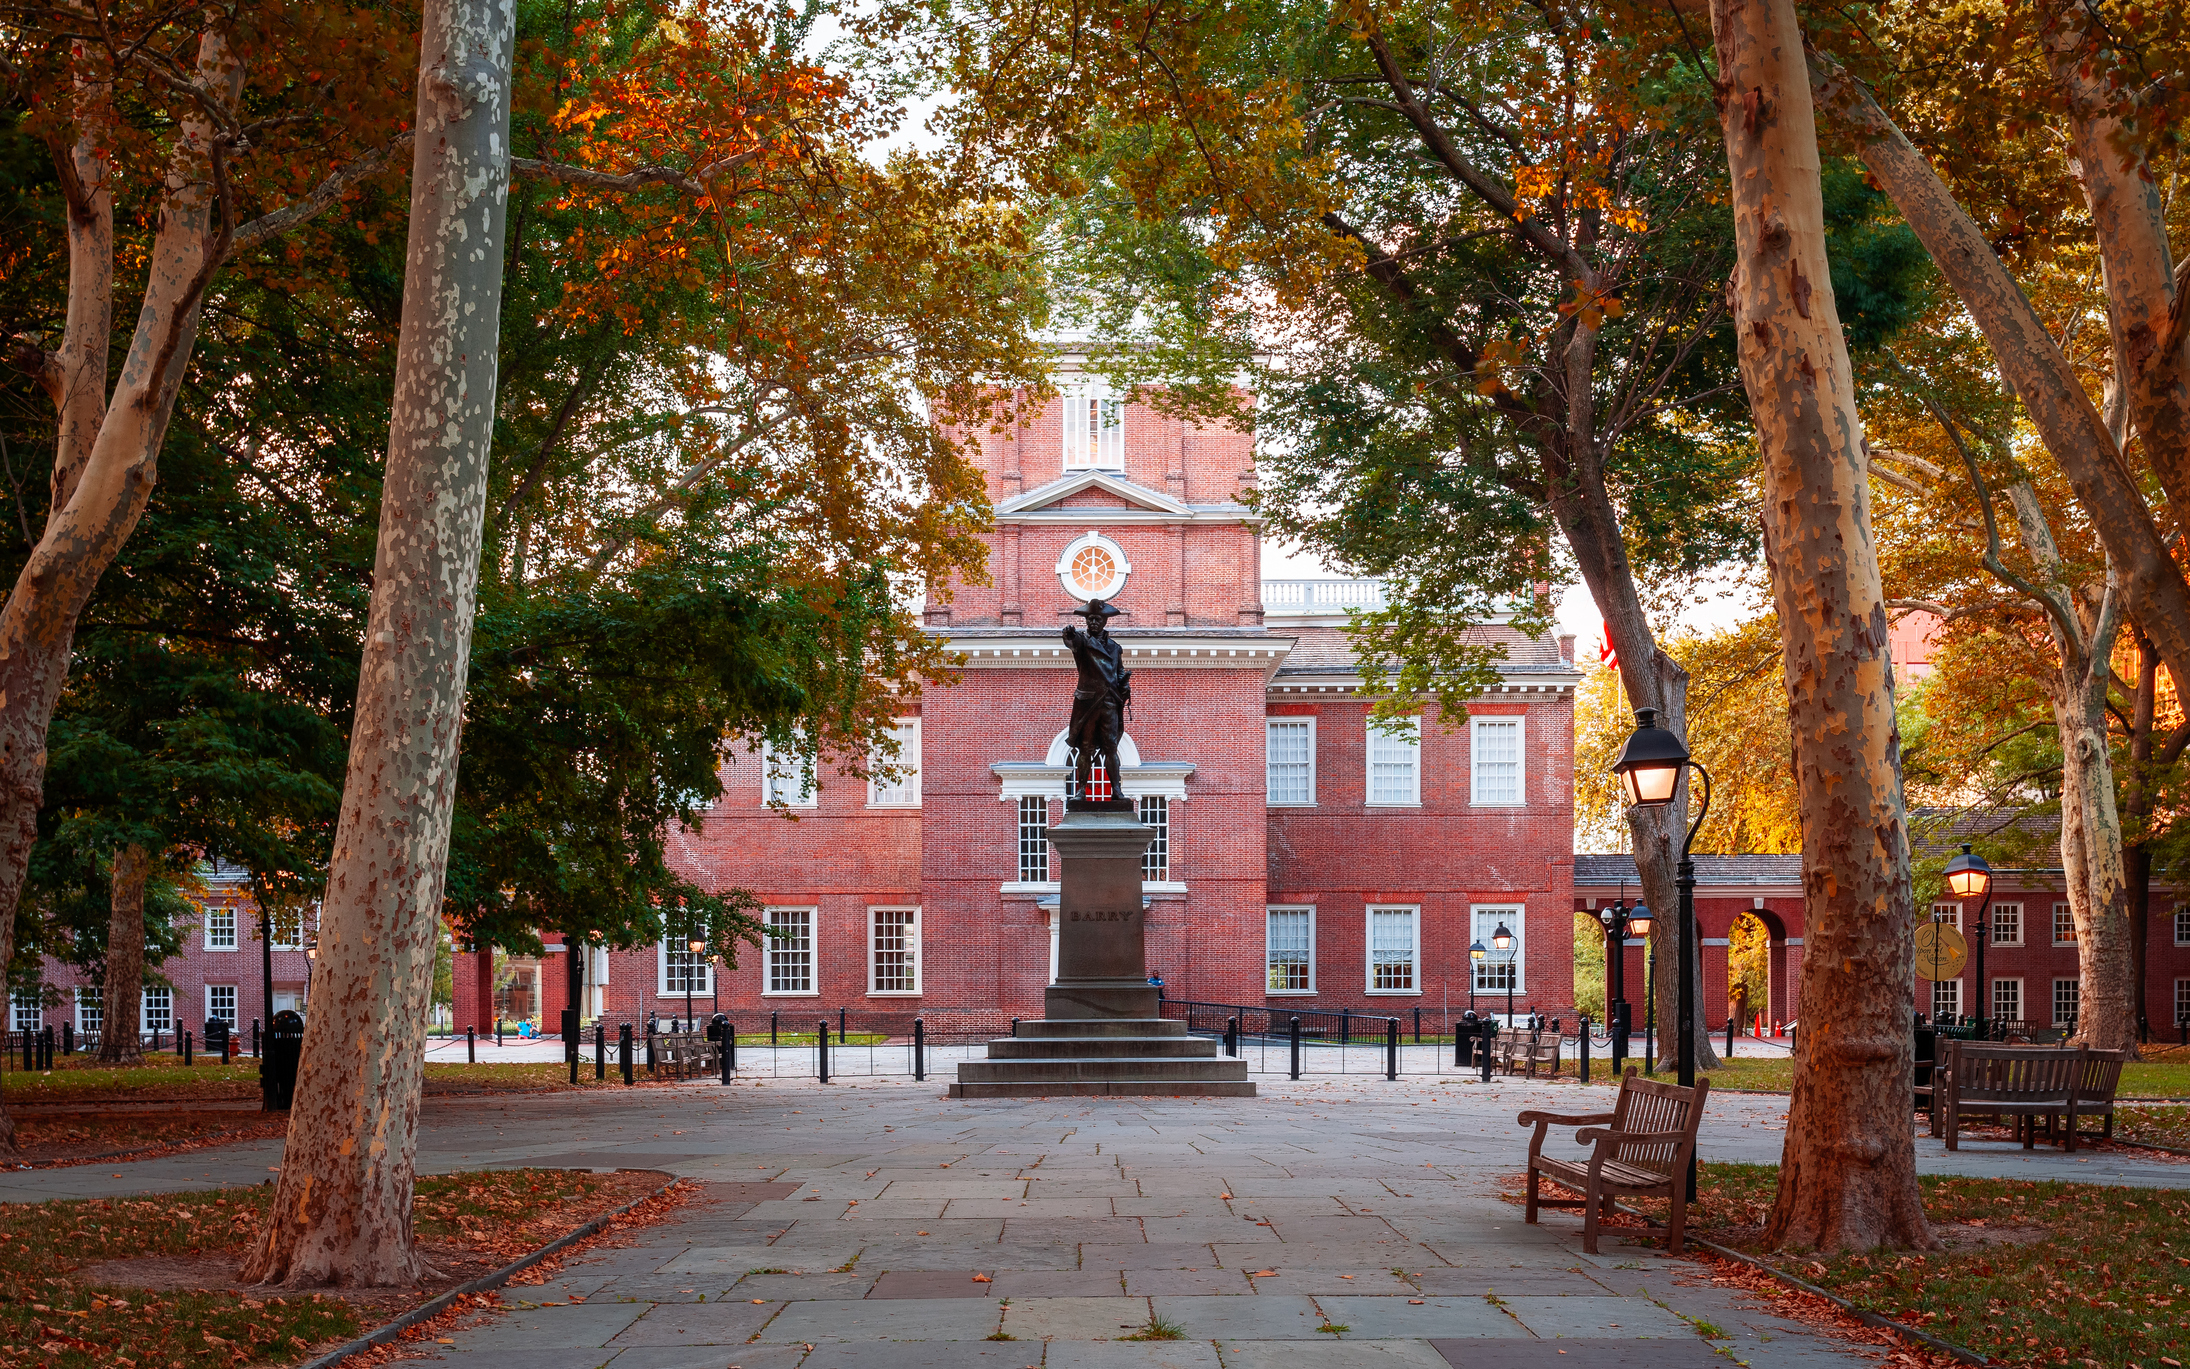 Historic brick building with a central clock and statue in a treelined courtyard